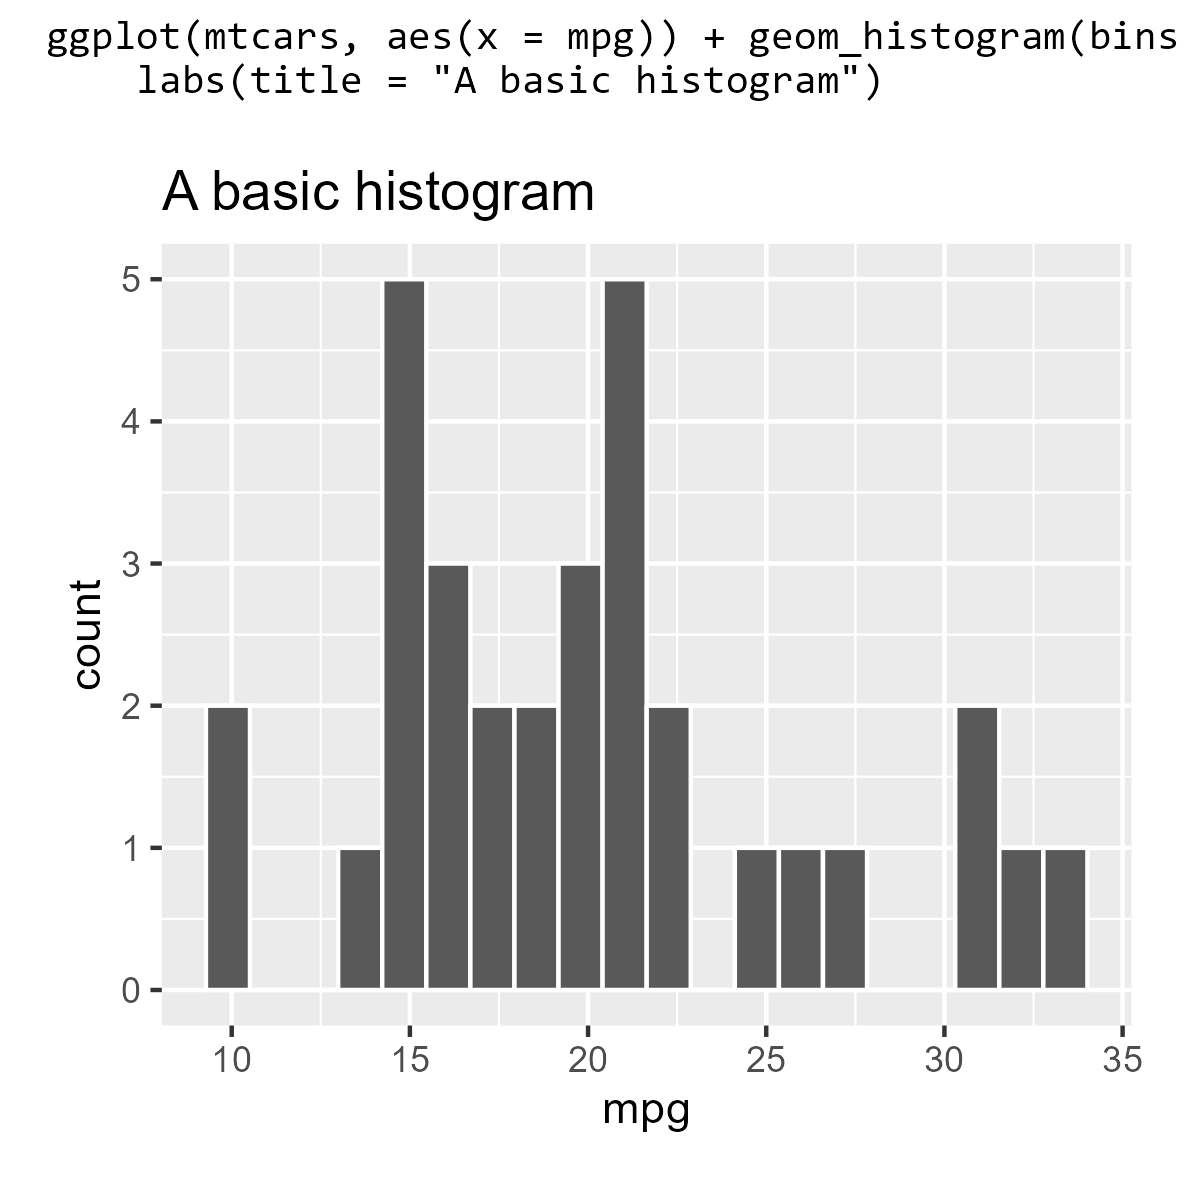 A ggplot2 plot of a histogram with the plotting code above the image. In this case, the title is mostly on one line and some text is cut off from the image.